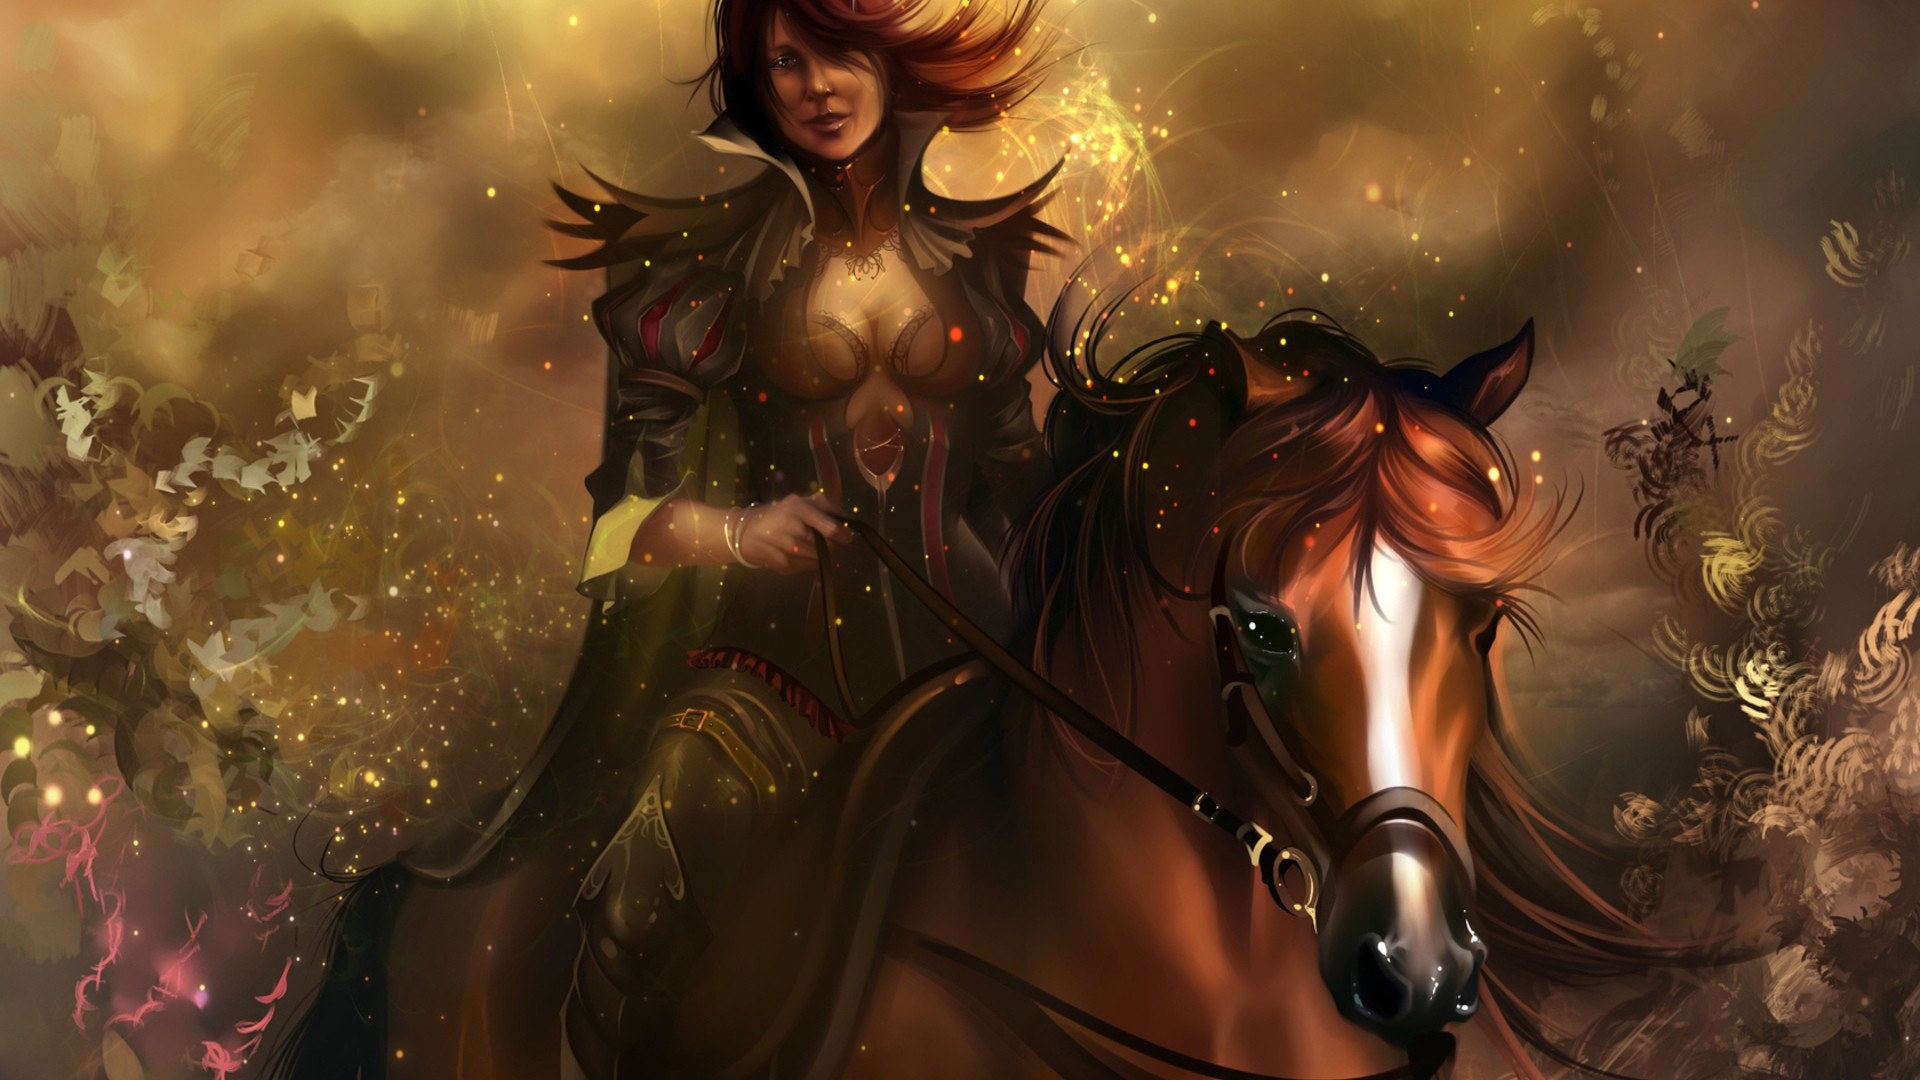 Rider On A Horse Art Image